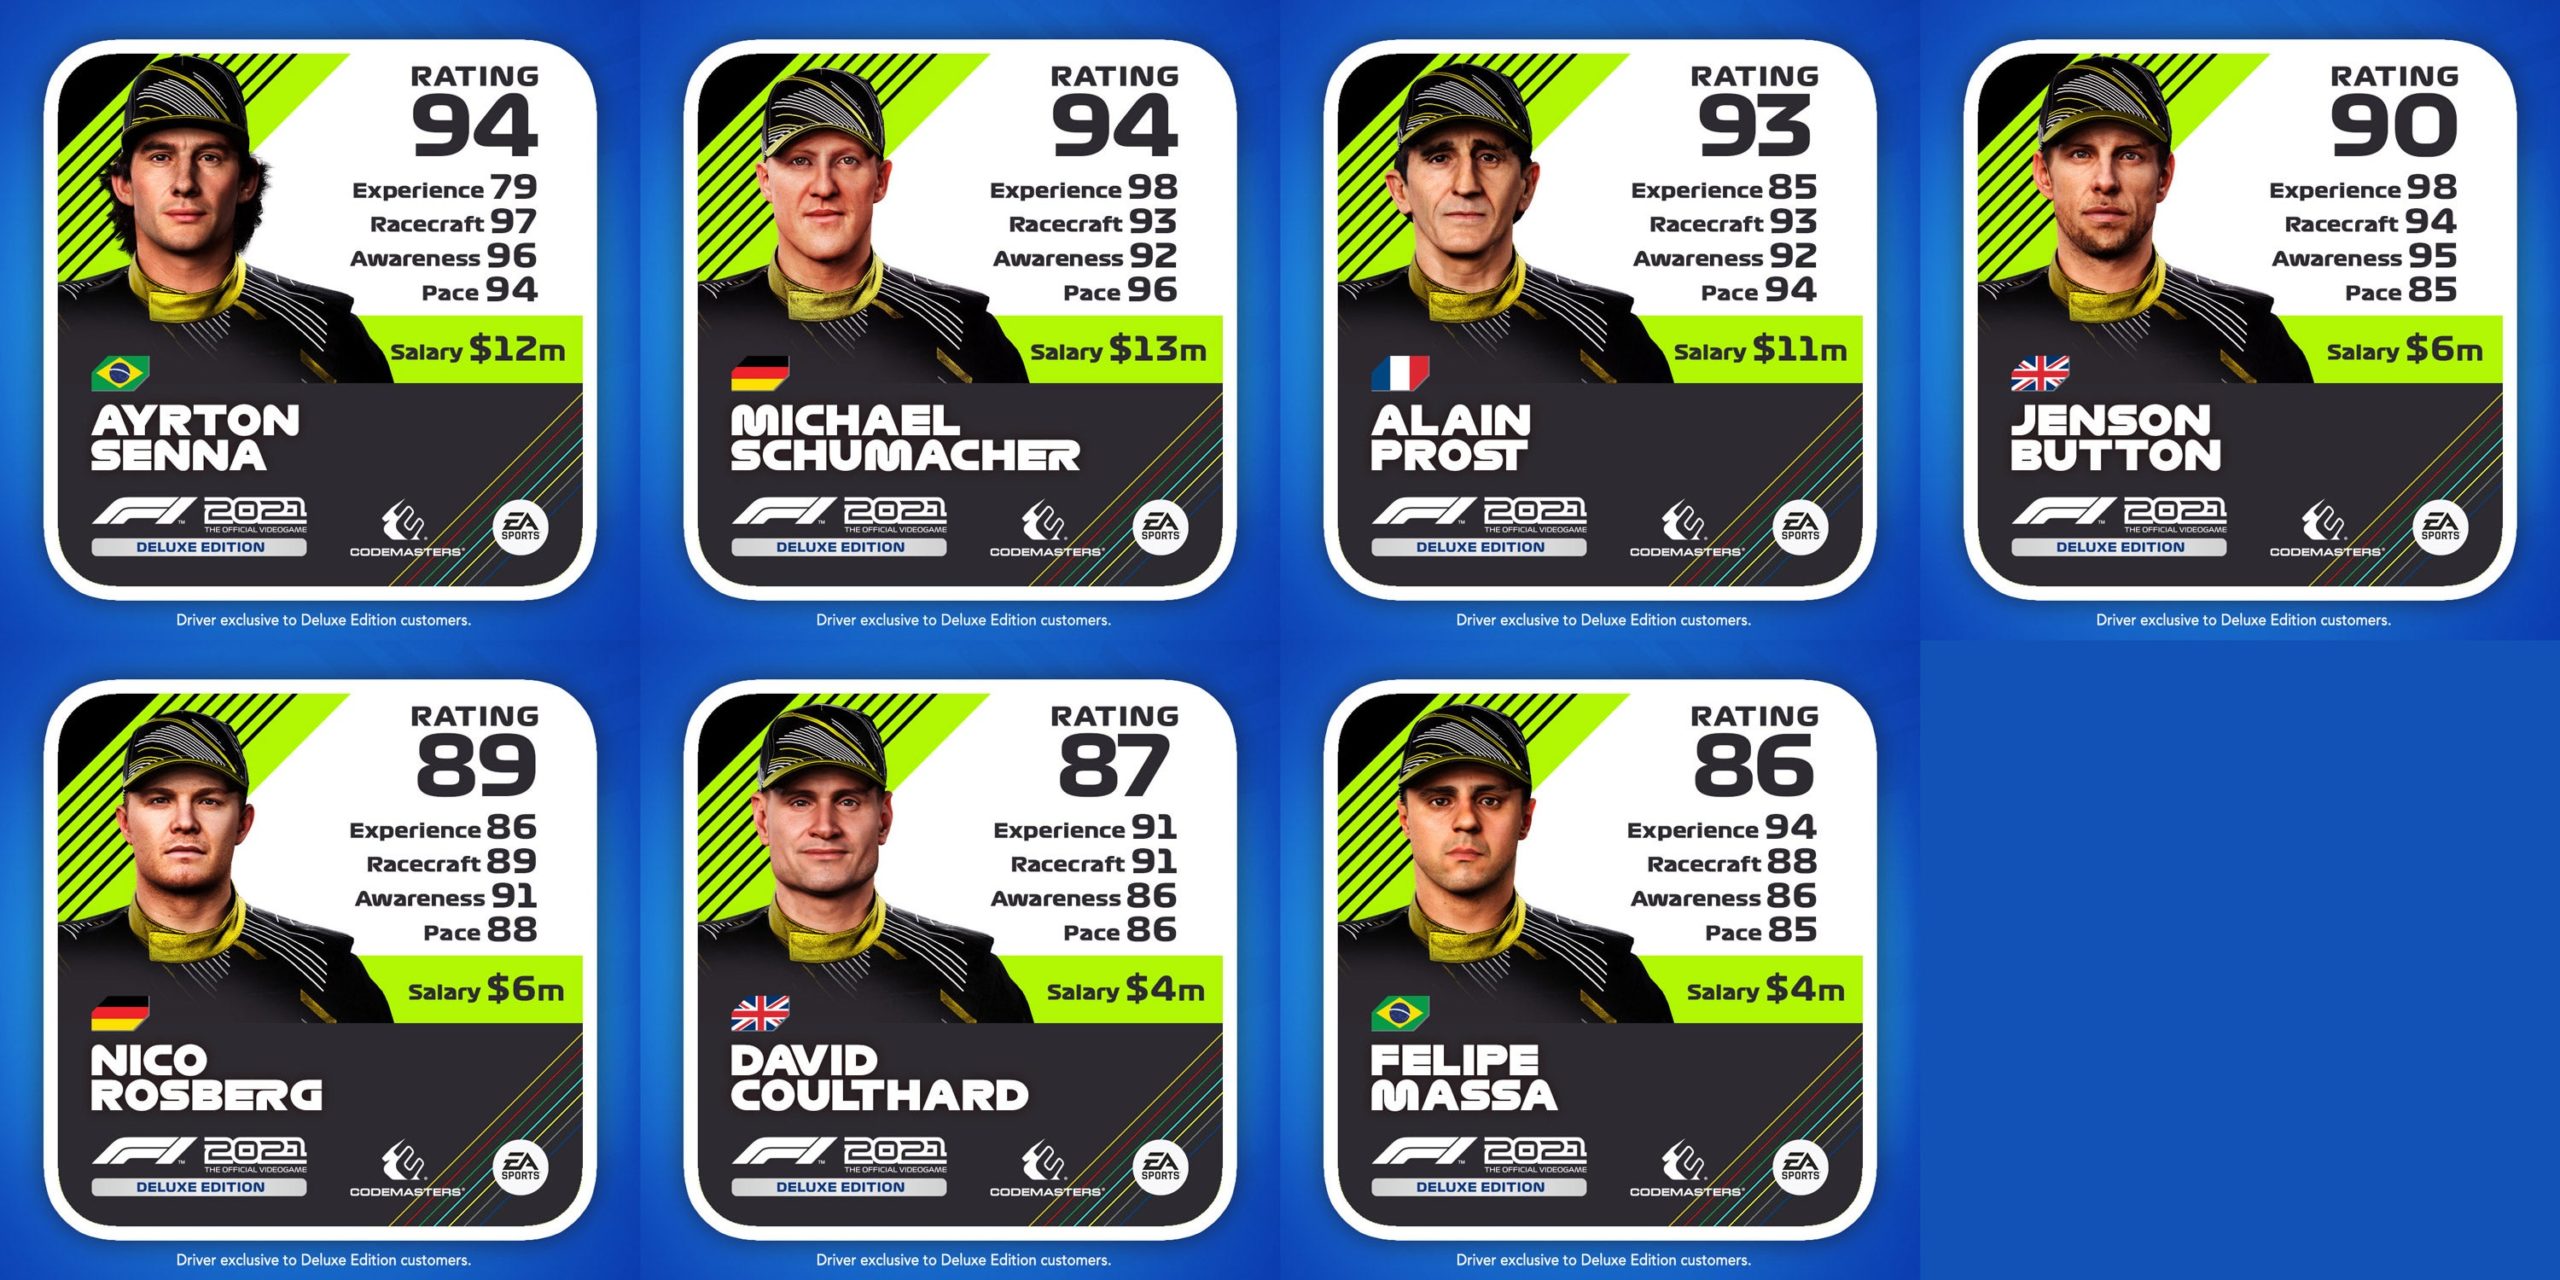 F1 2021 Lets You Sign 7 Historic Drivers To Your Team, So Let’s Argue About Their Ratings